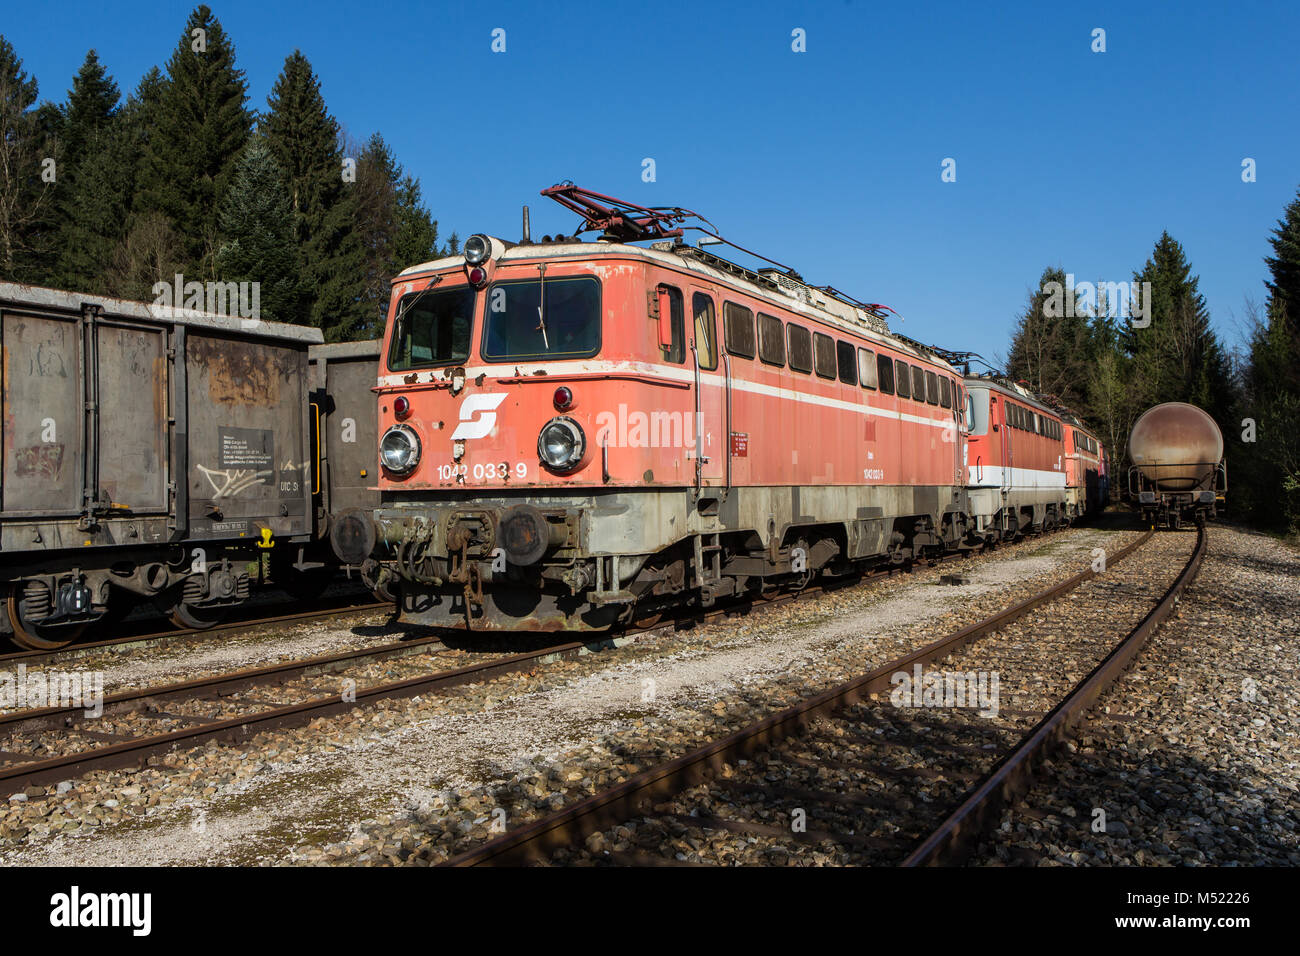 Old abandoned trains and freight wagon Stock Photo